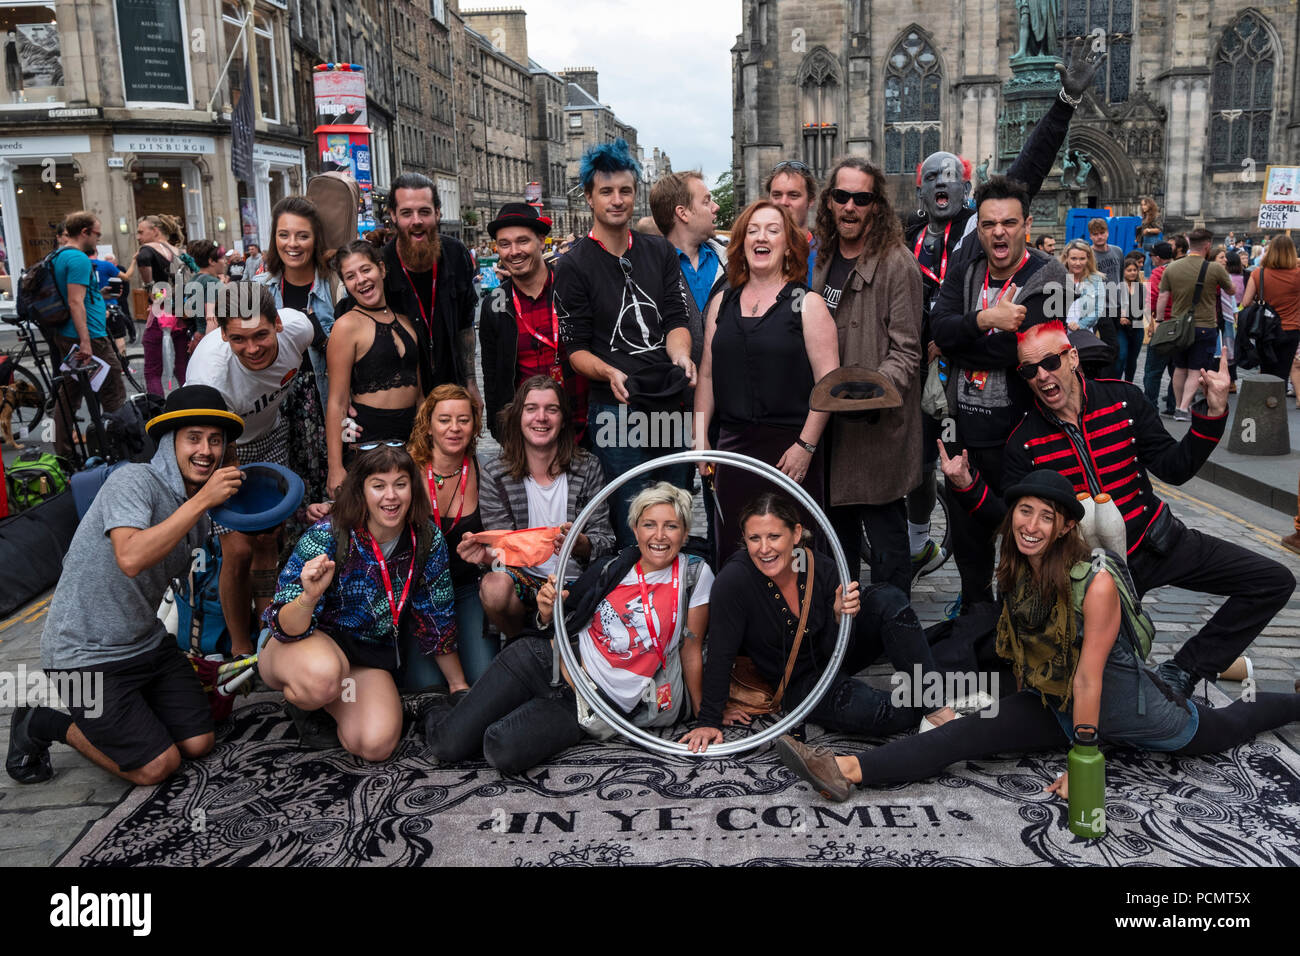 Edinburgh, Scotland, UK; 3 August, 2018. Official Opening of the new Virgin Money Fringe Street Events on the Royal Mile in Edinburgh. Performers and Shona McCarthy Chief Executive of the Edinburgh Fringe Society gather to cut the red ribbon and open this year's Fringe Festival. Credit: Iain Masterton/Alamy Live News Stock Photo